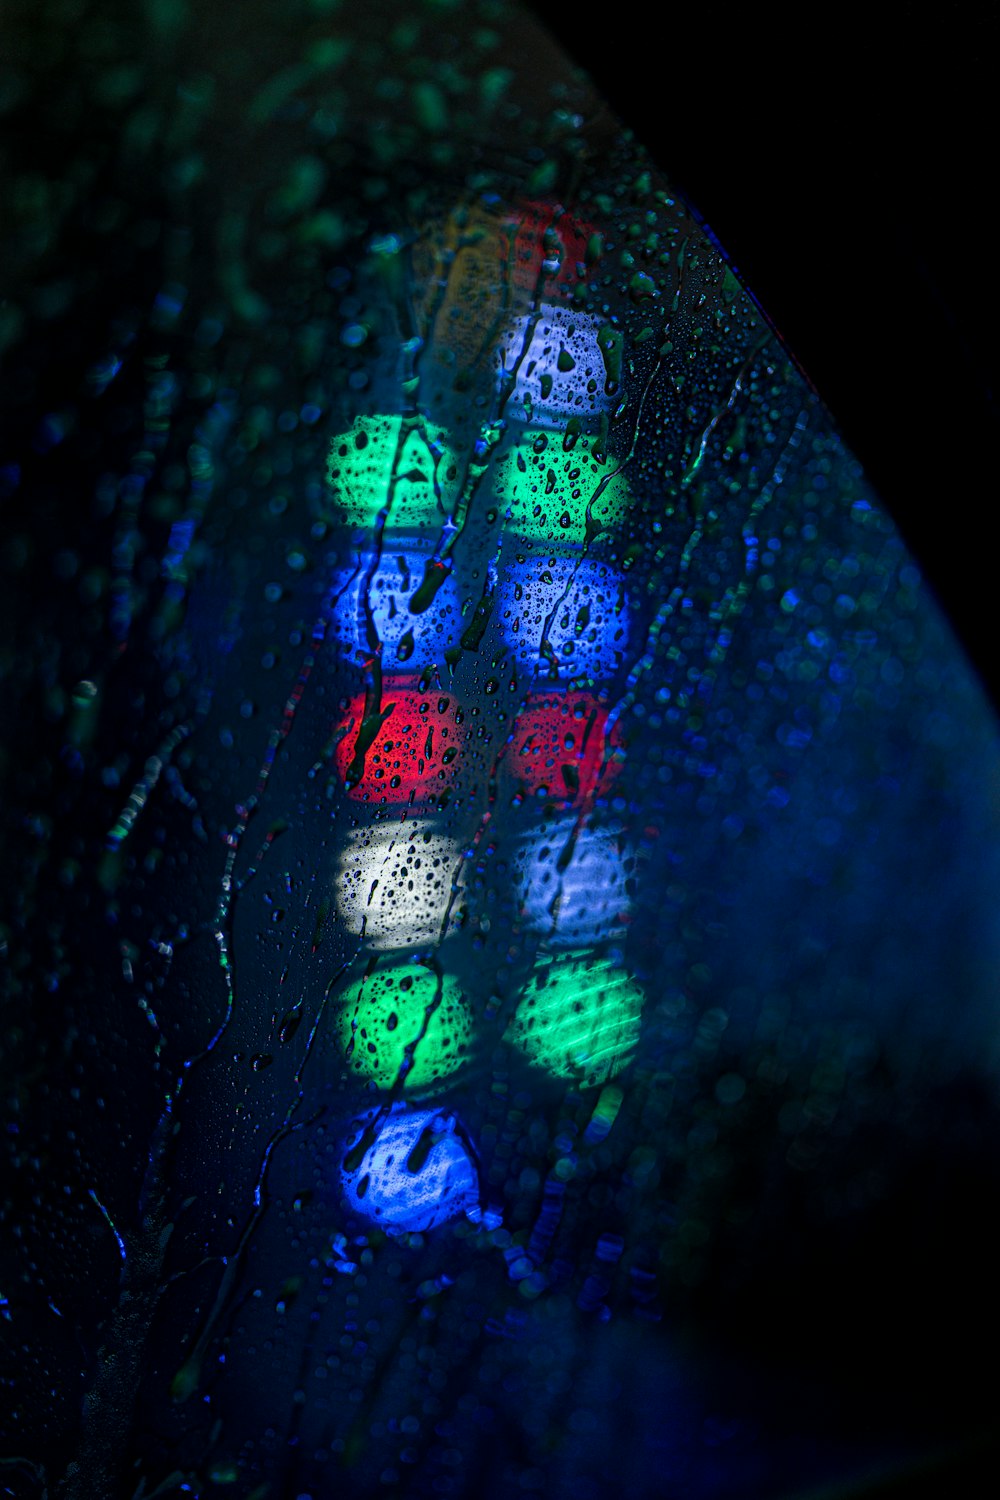 a close up of a traffic light on a rainy day